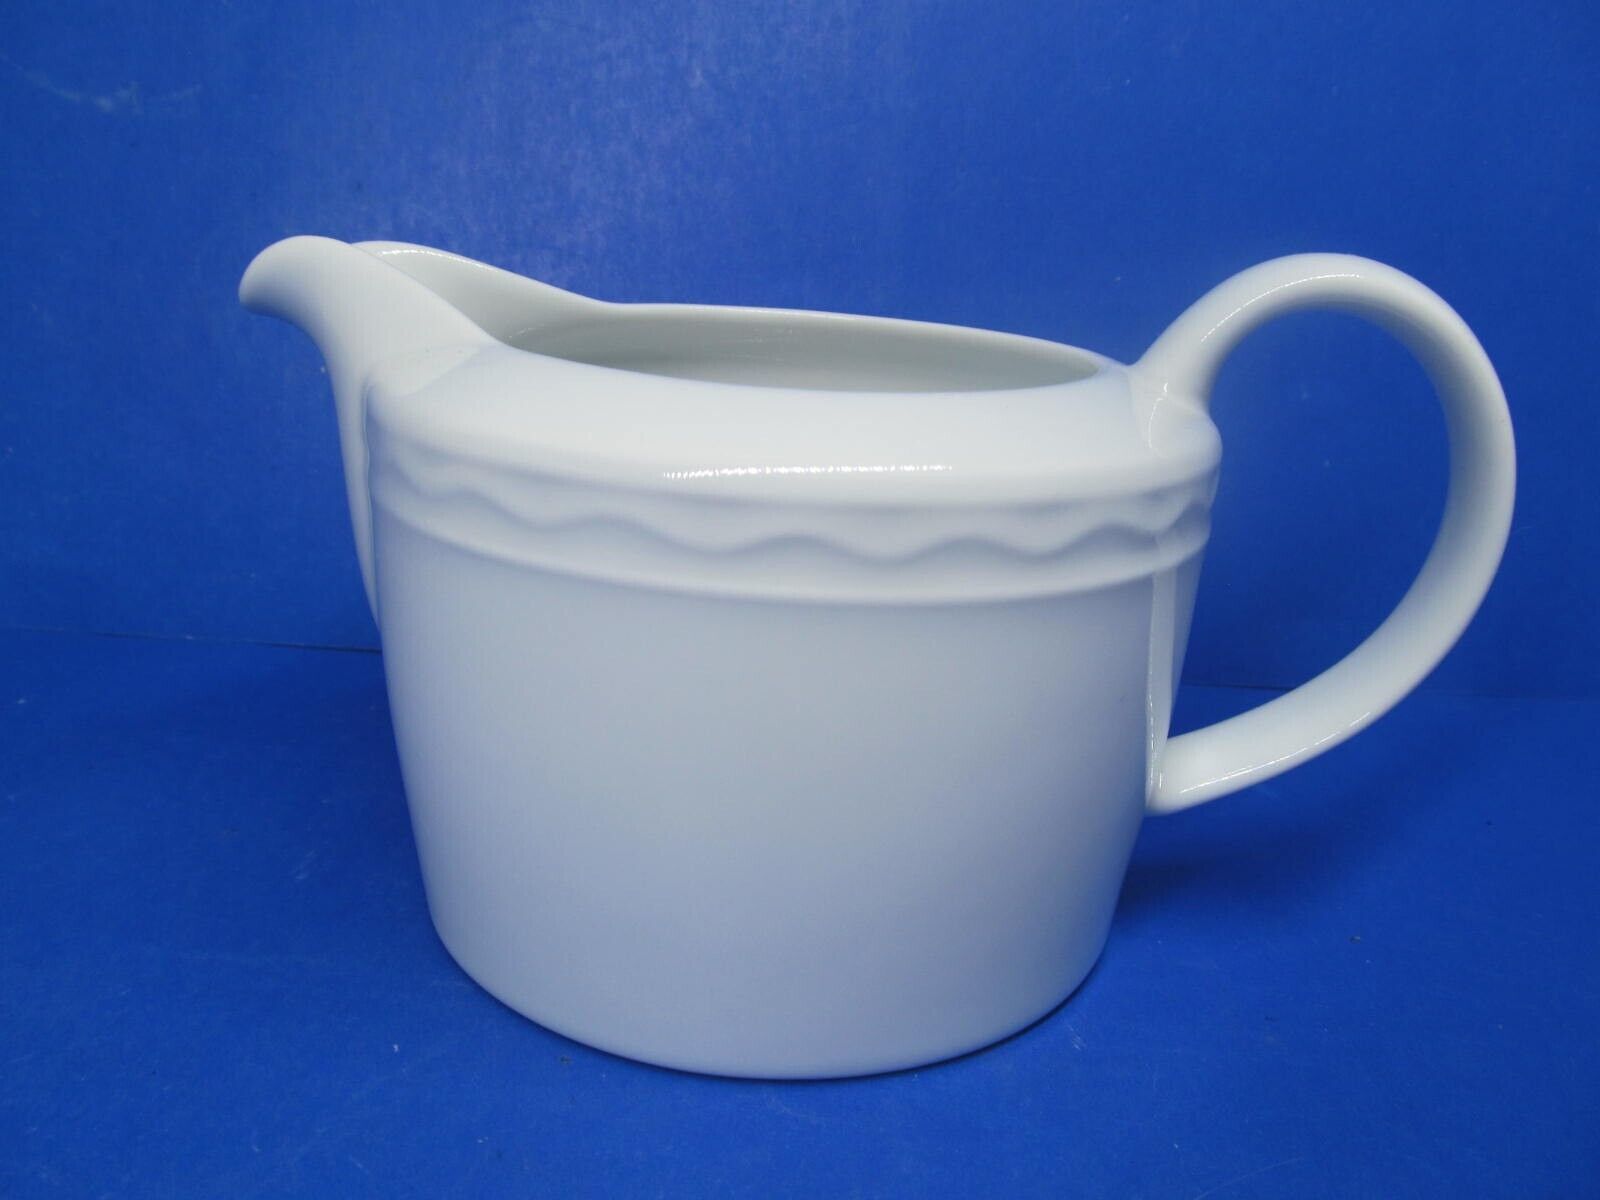 Crate And Barrel Palazzo Spal Porcelain Portugal White Gravy Boat EC - $69.00